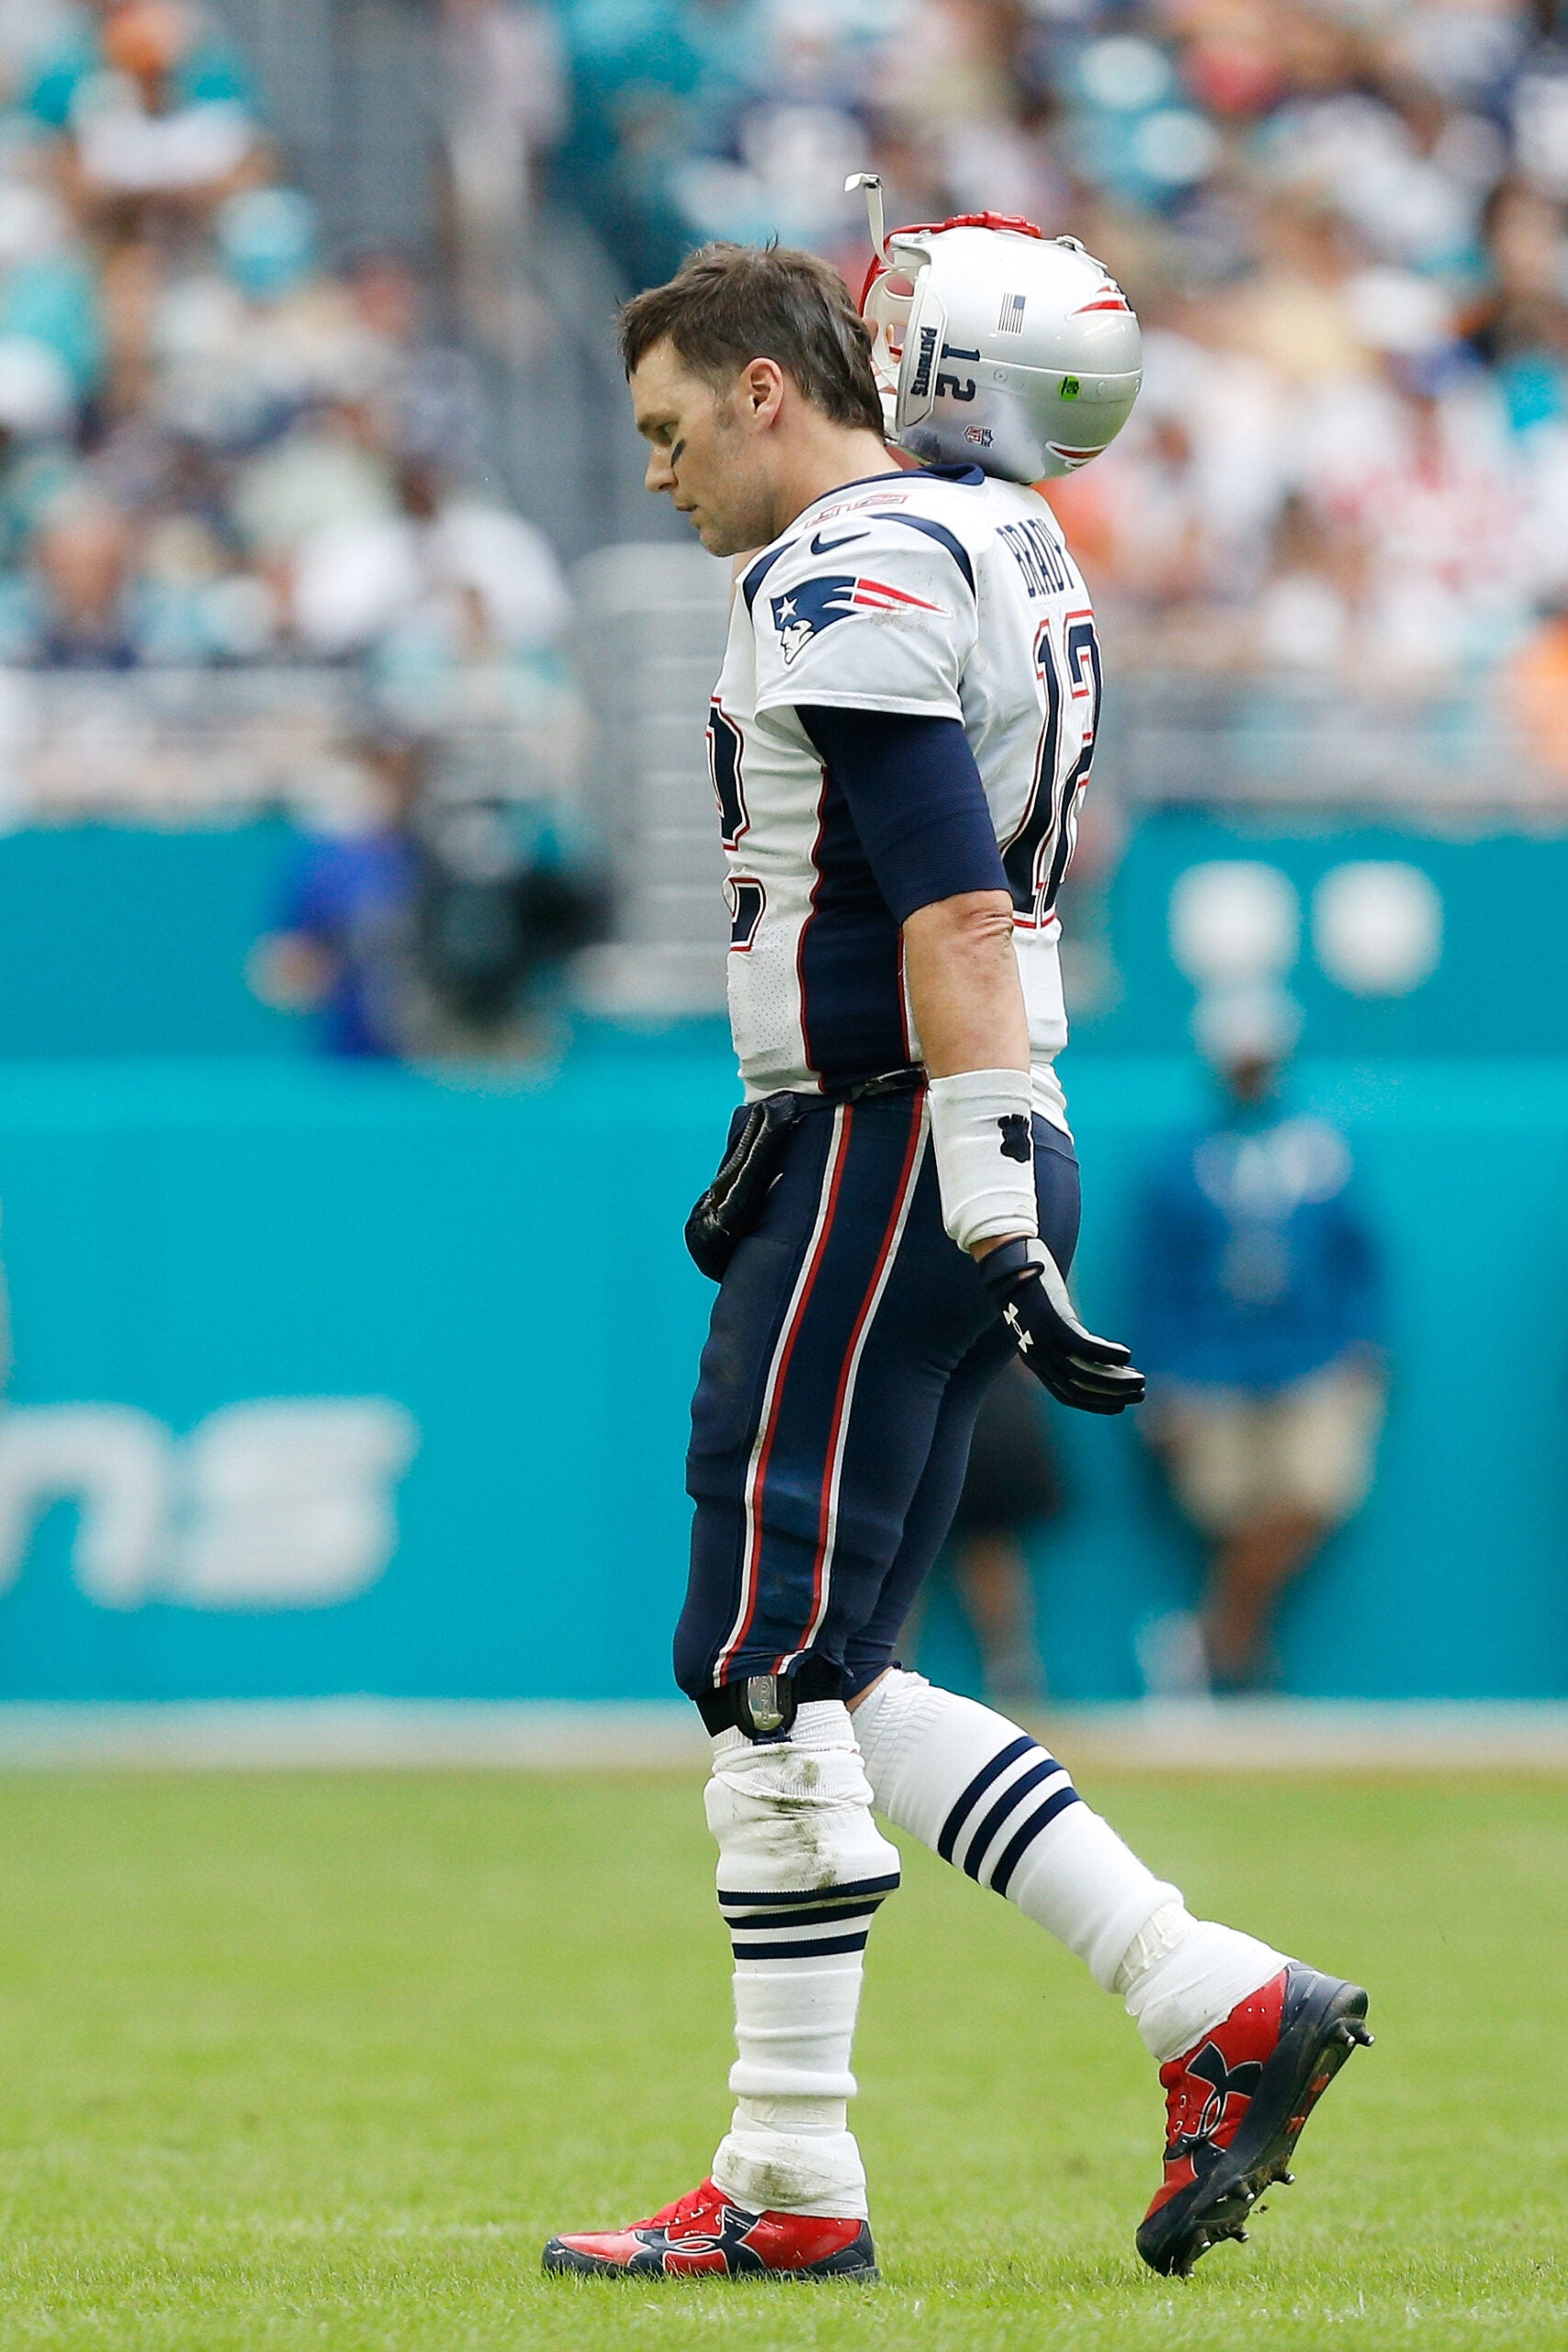 Tom Brady on Miami's gamewinning play 'It shouldn't have come down to